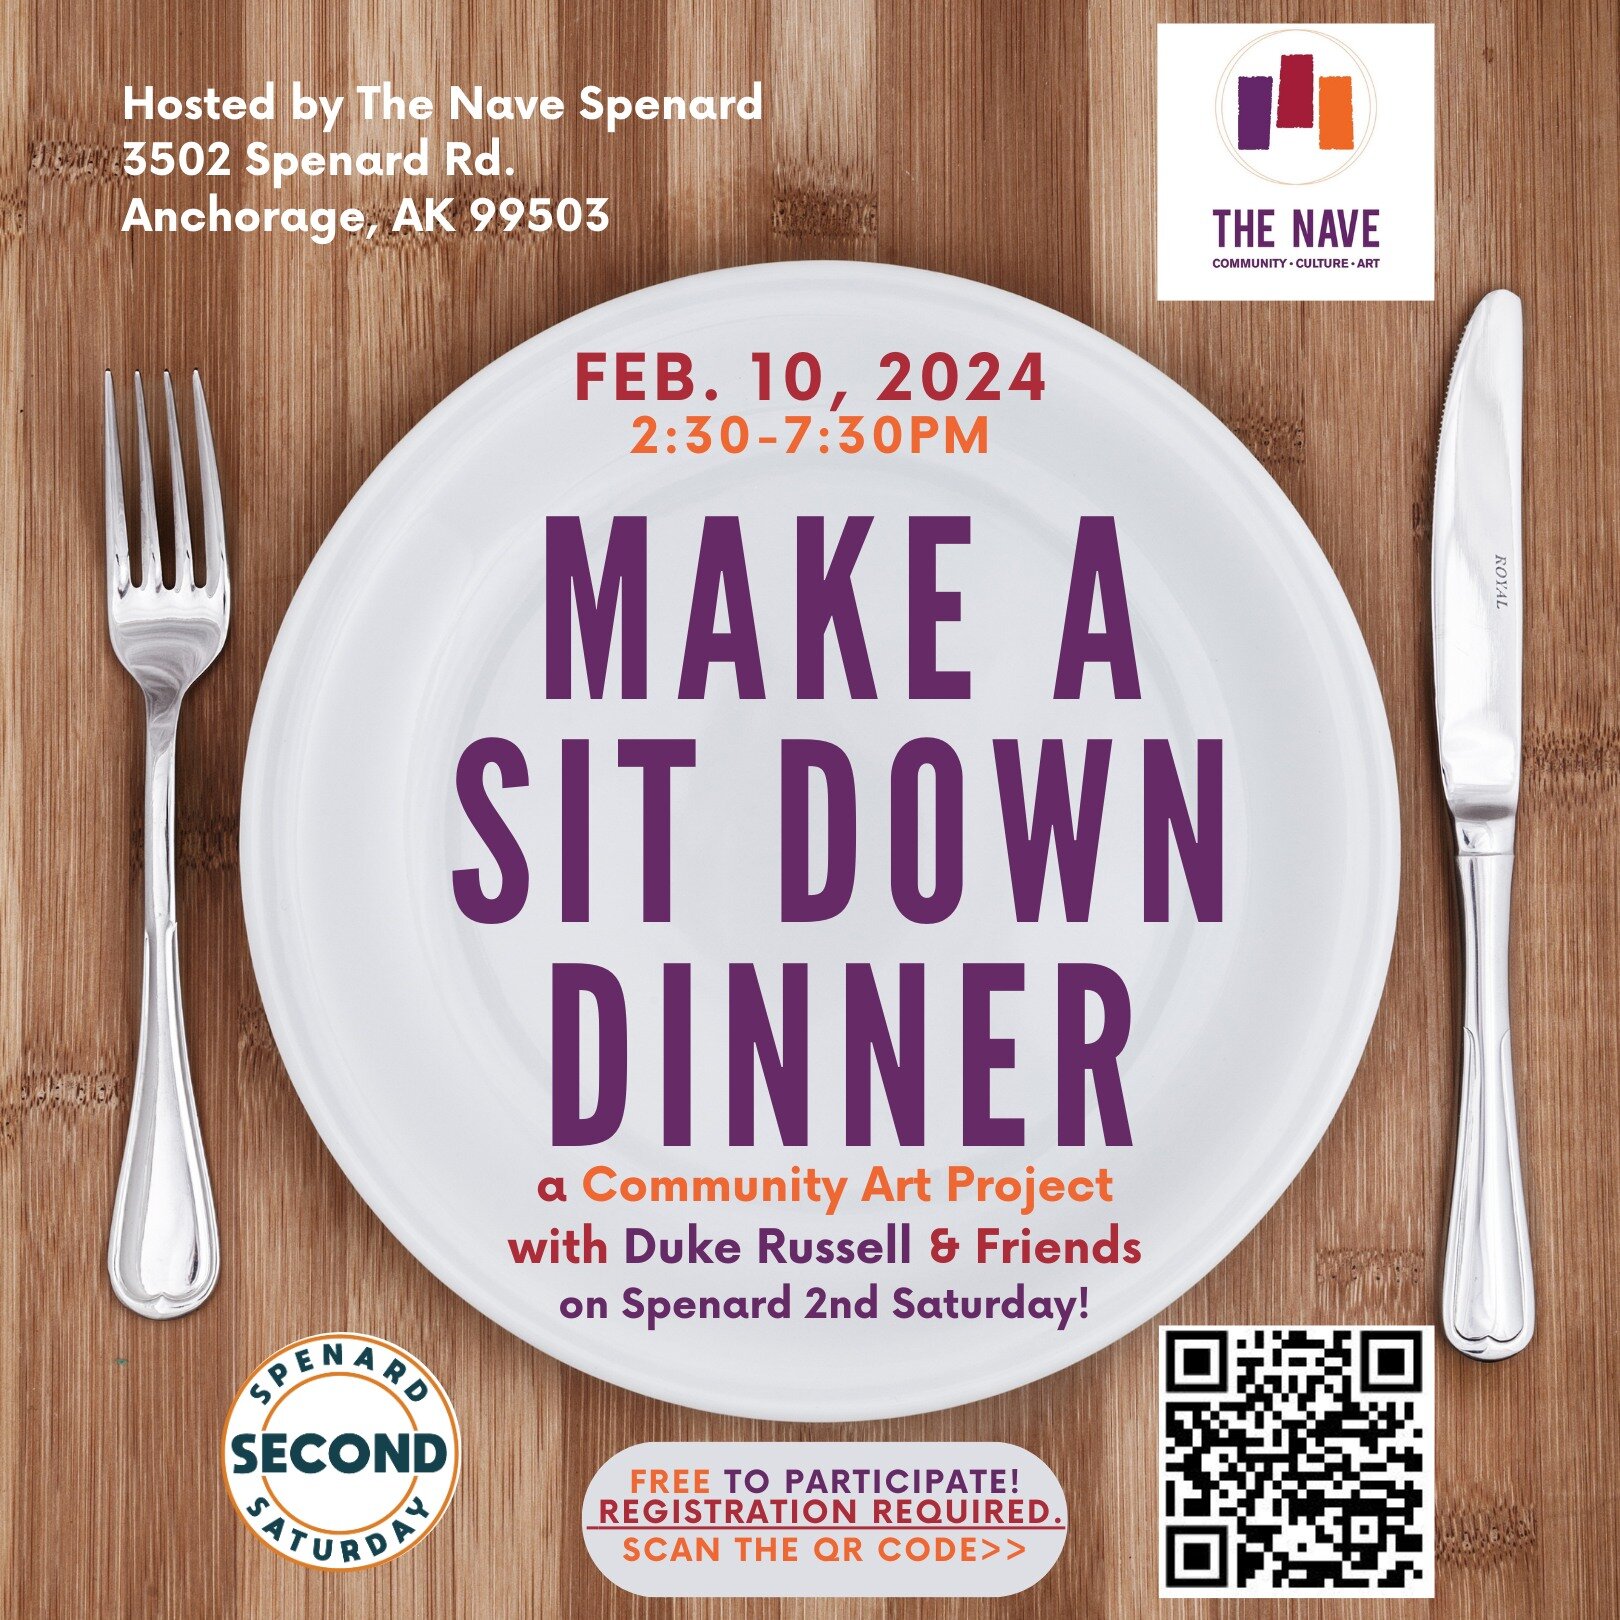 Reminder to Register: This SATURDAY 2/10 - &quot;MAKE A SIT DOWN DINNER&quot; with Duke Russell &amp; Friends at The Nave Spenard. Registration is FREE, spots are filling up quickly! Don't miss this unique #Spenard2ndSaturday event hosted by The Nave